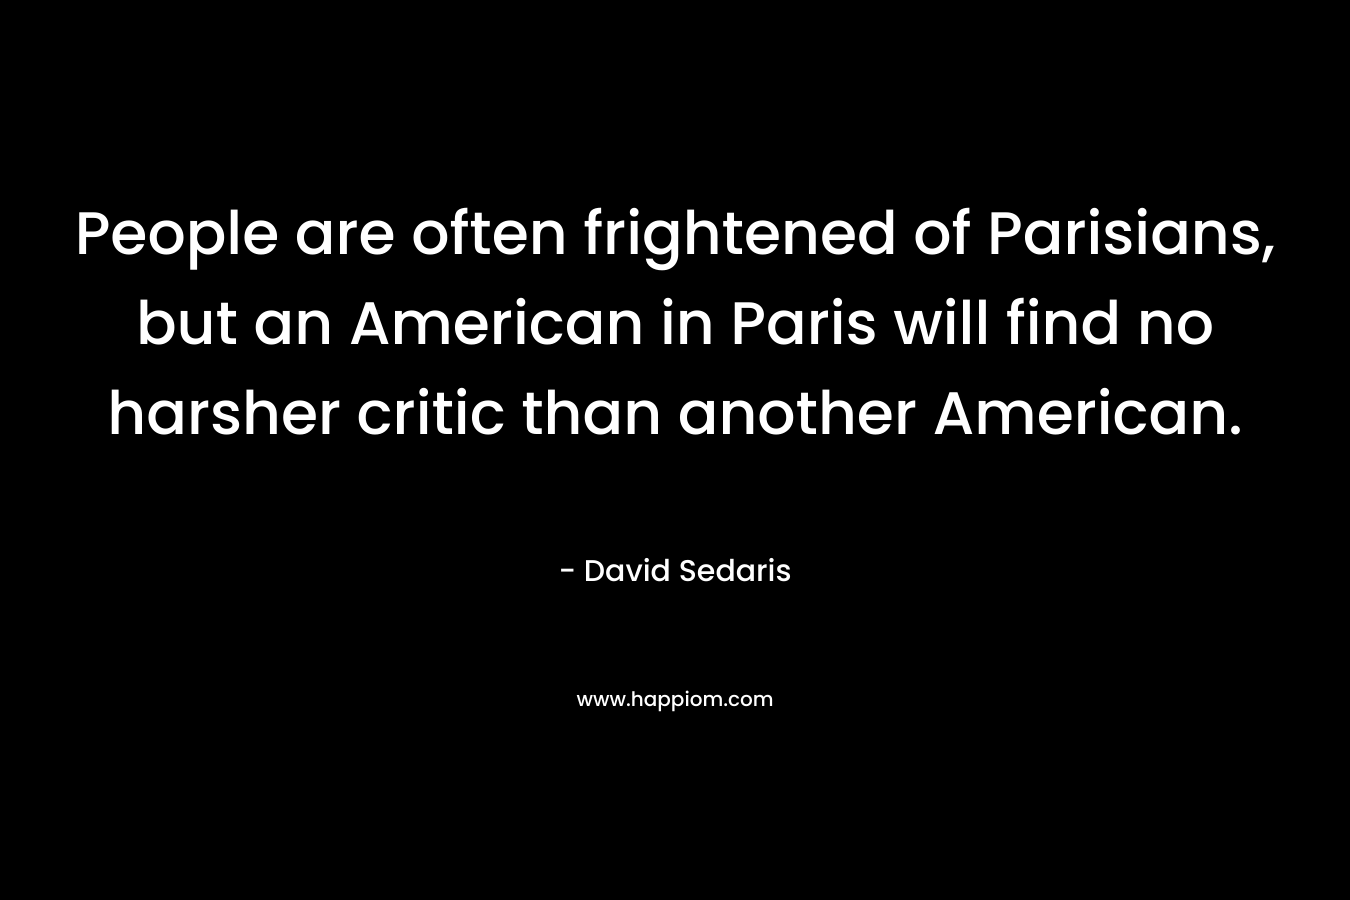 People are often frightened of Parisians, but an American in Paris will find no harsher critic than another American.